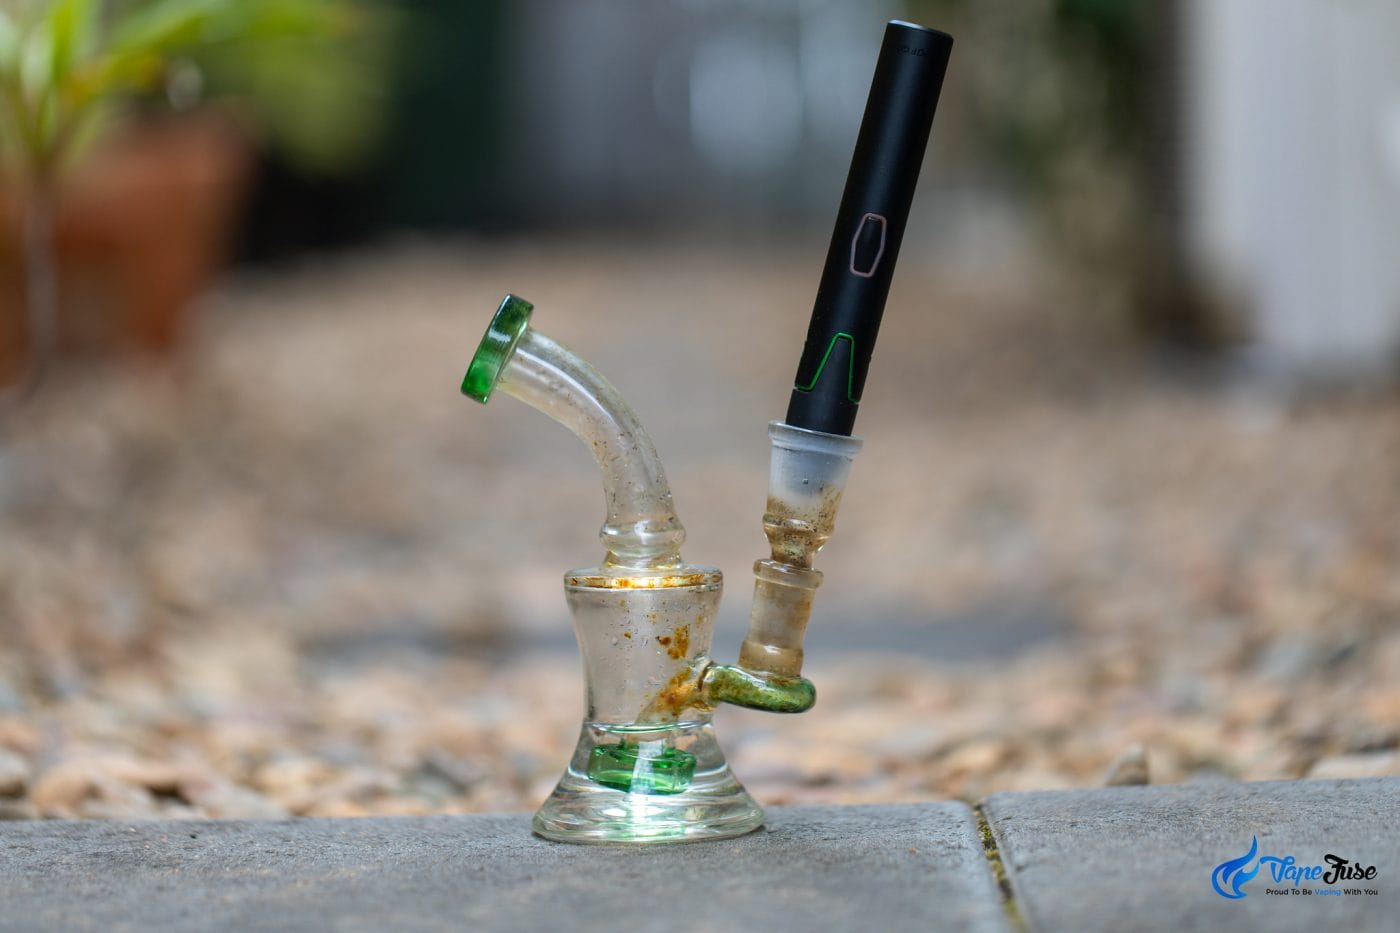 VleaF Go on demand portable vaporizer with water pipe